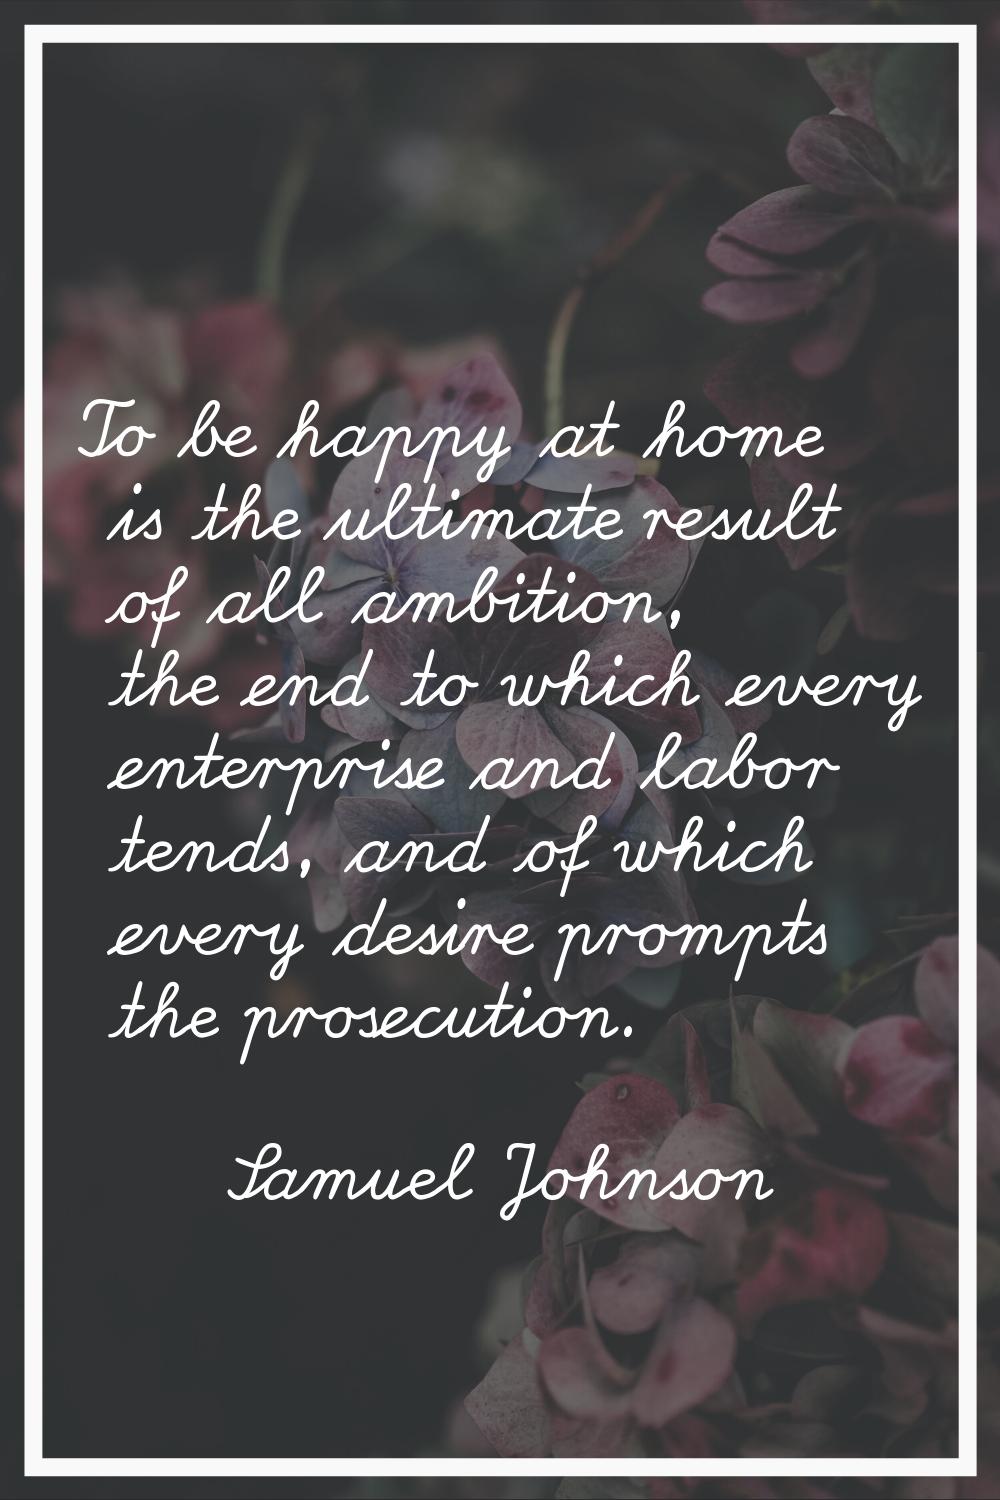 To be happy at home is the ultimate result of all ambition, the end to which every enterprise and l